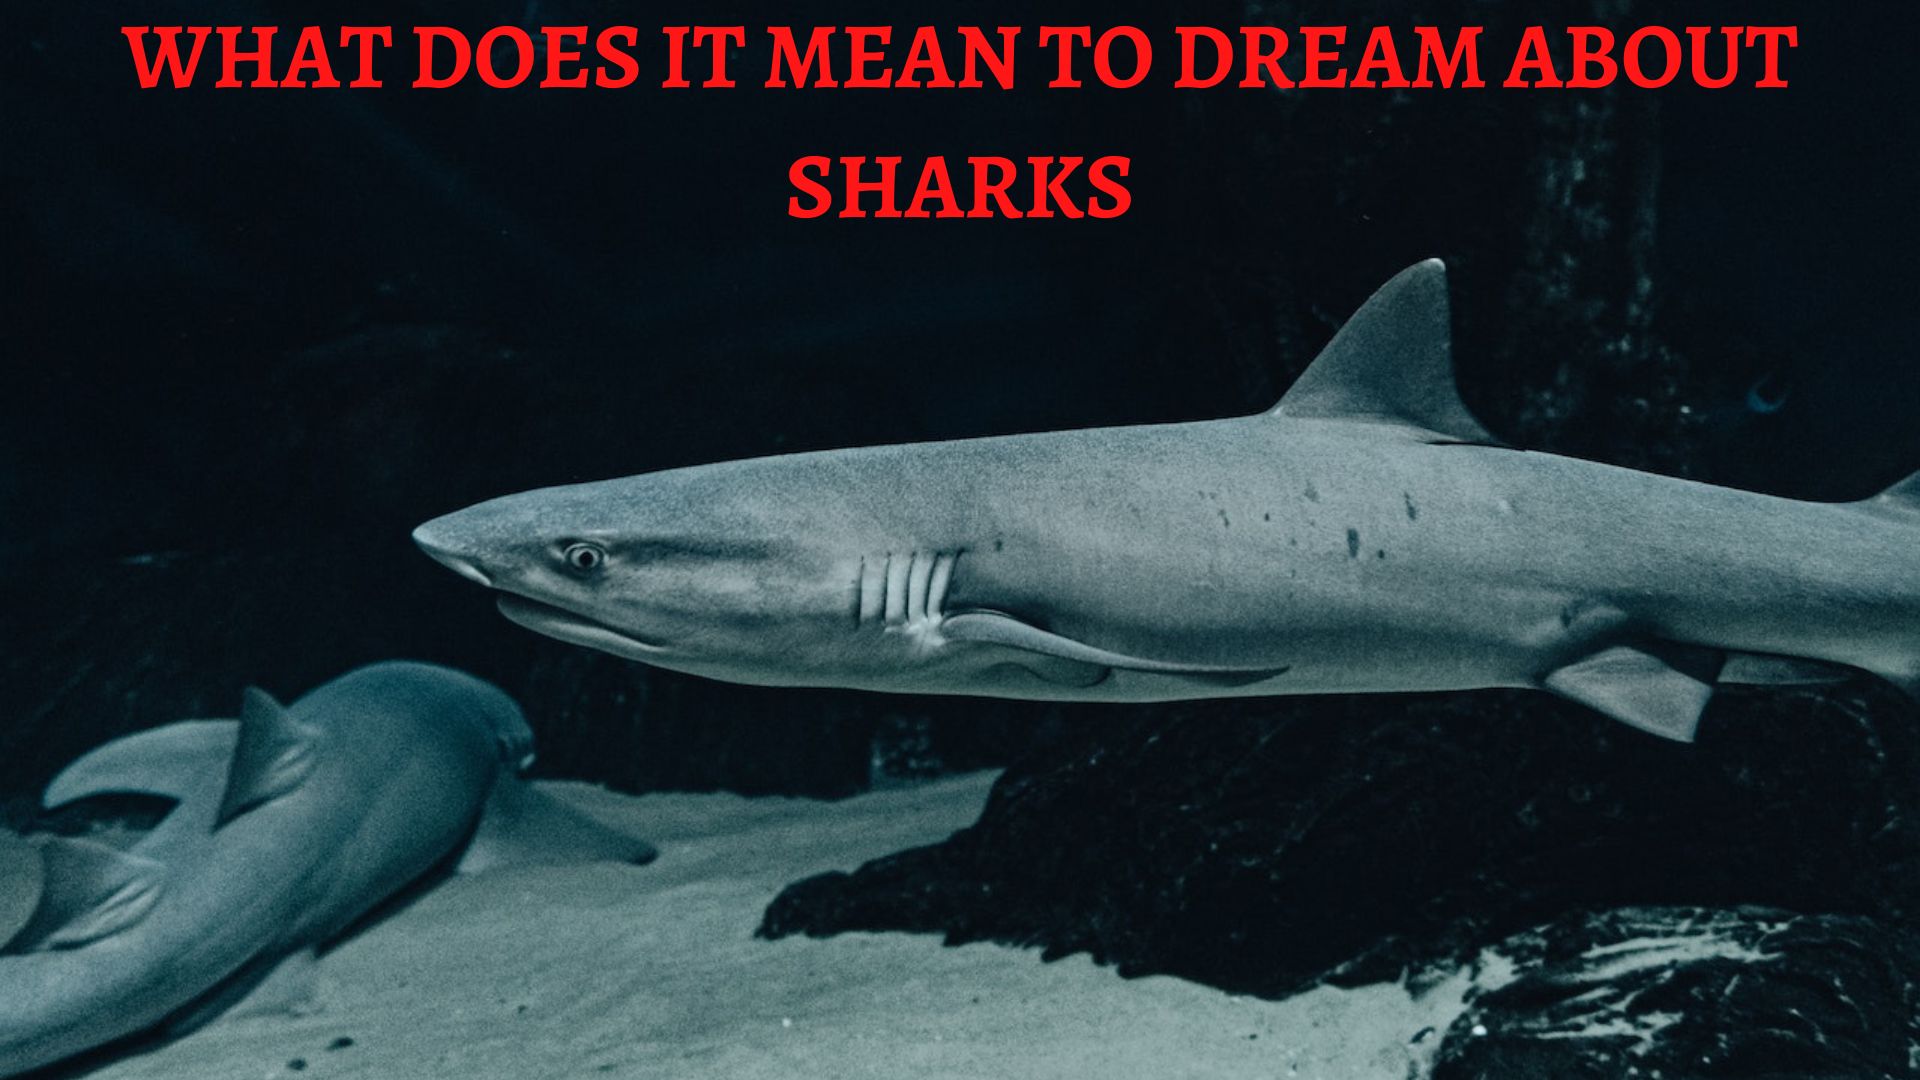 What Does It Mean To Dream About Sharks?